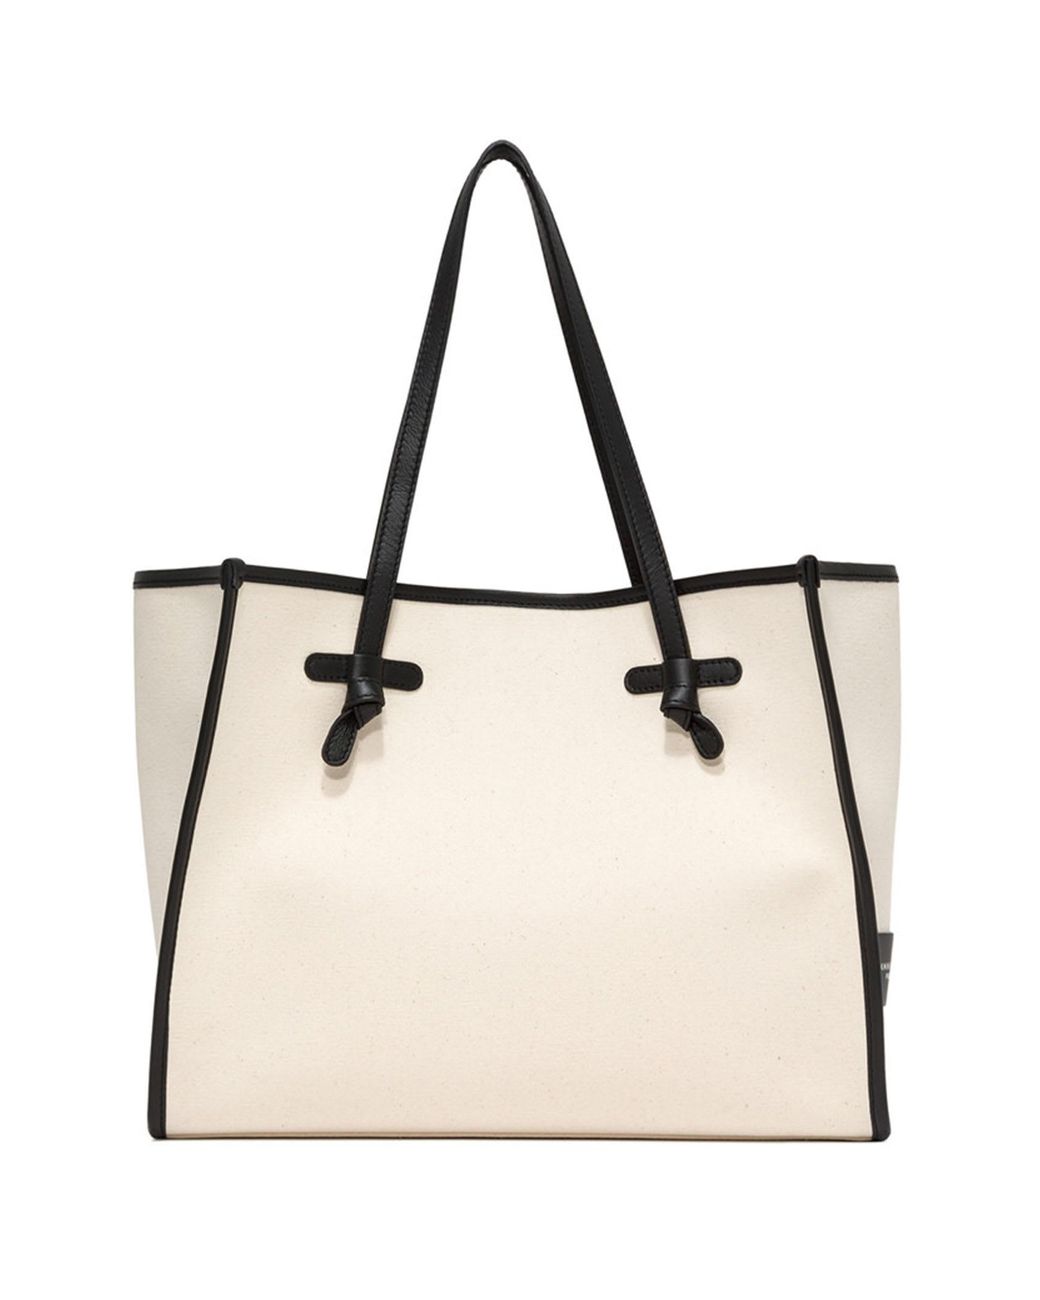 Gianni Chiarini Marcella Two-tone Leather Shopping Bag in Natural | Lyst